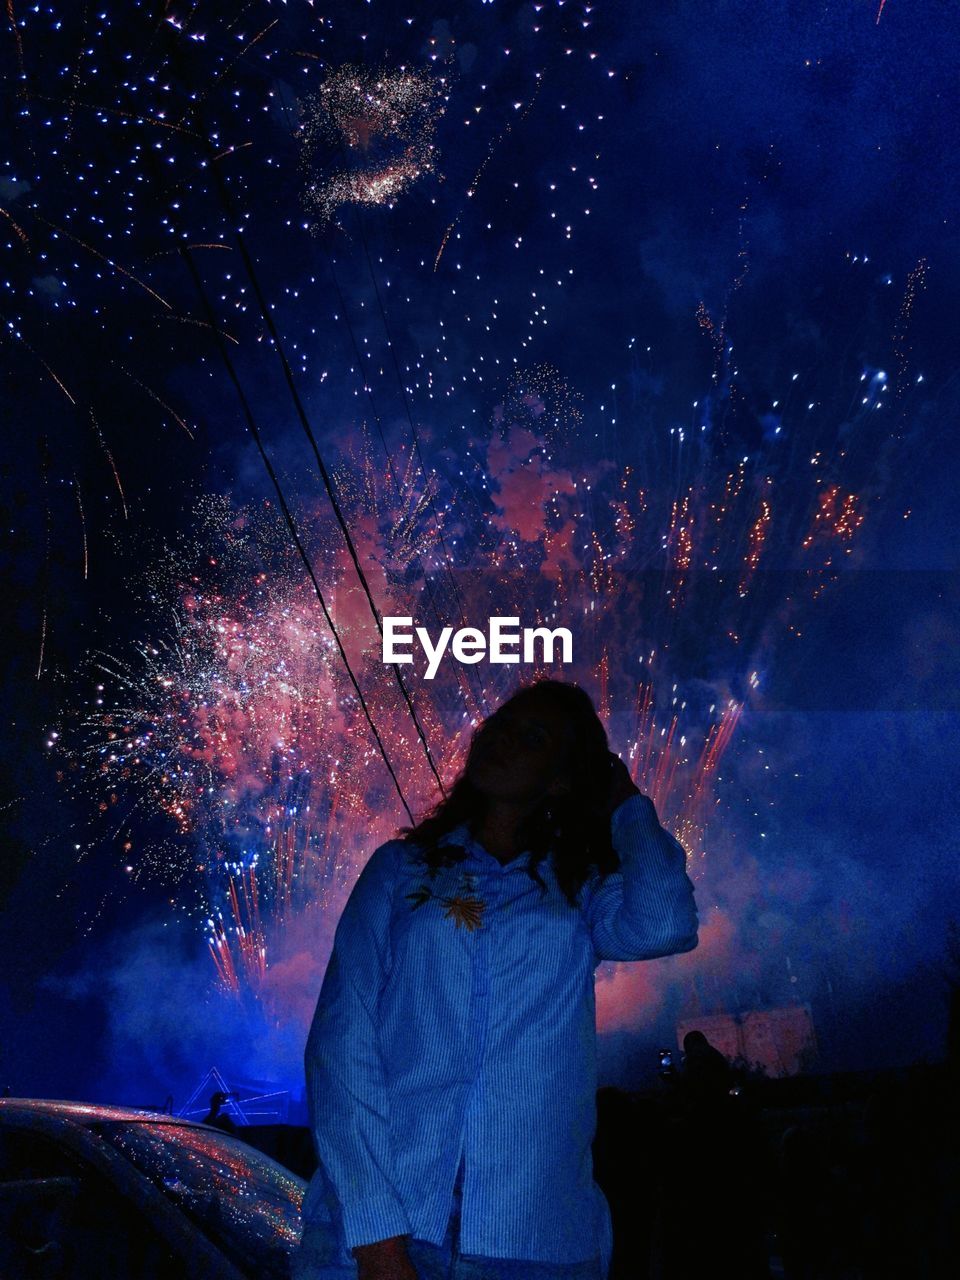 Woman standing by car against fireworks in sky at night